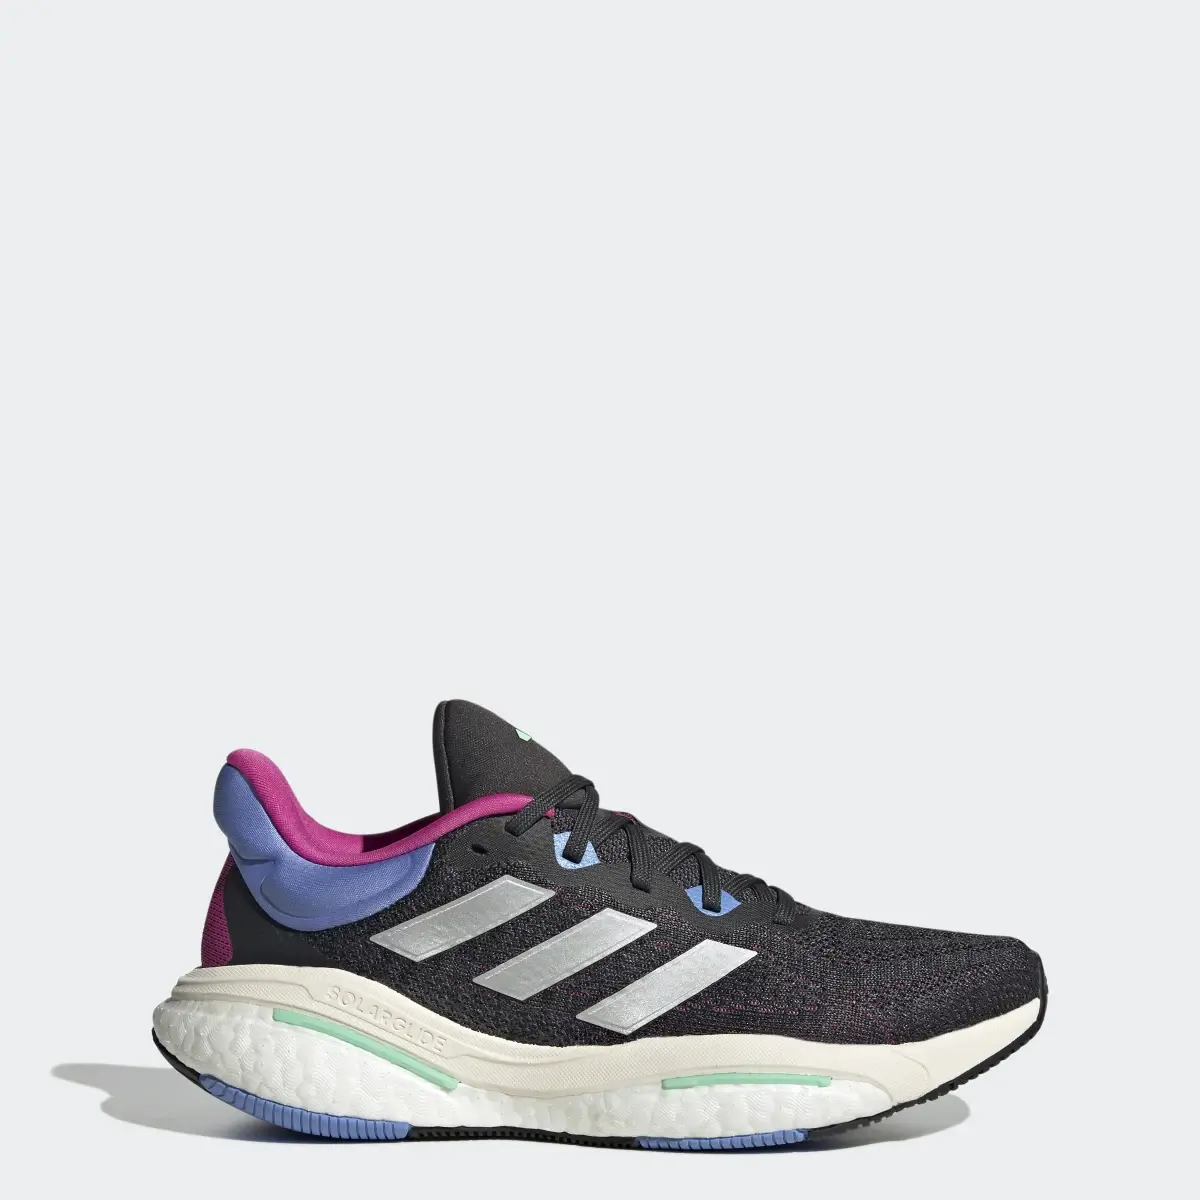 Adidas SOLARGLIDE 6 Running Shoes. 1